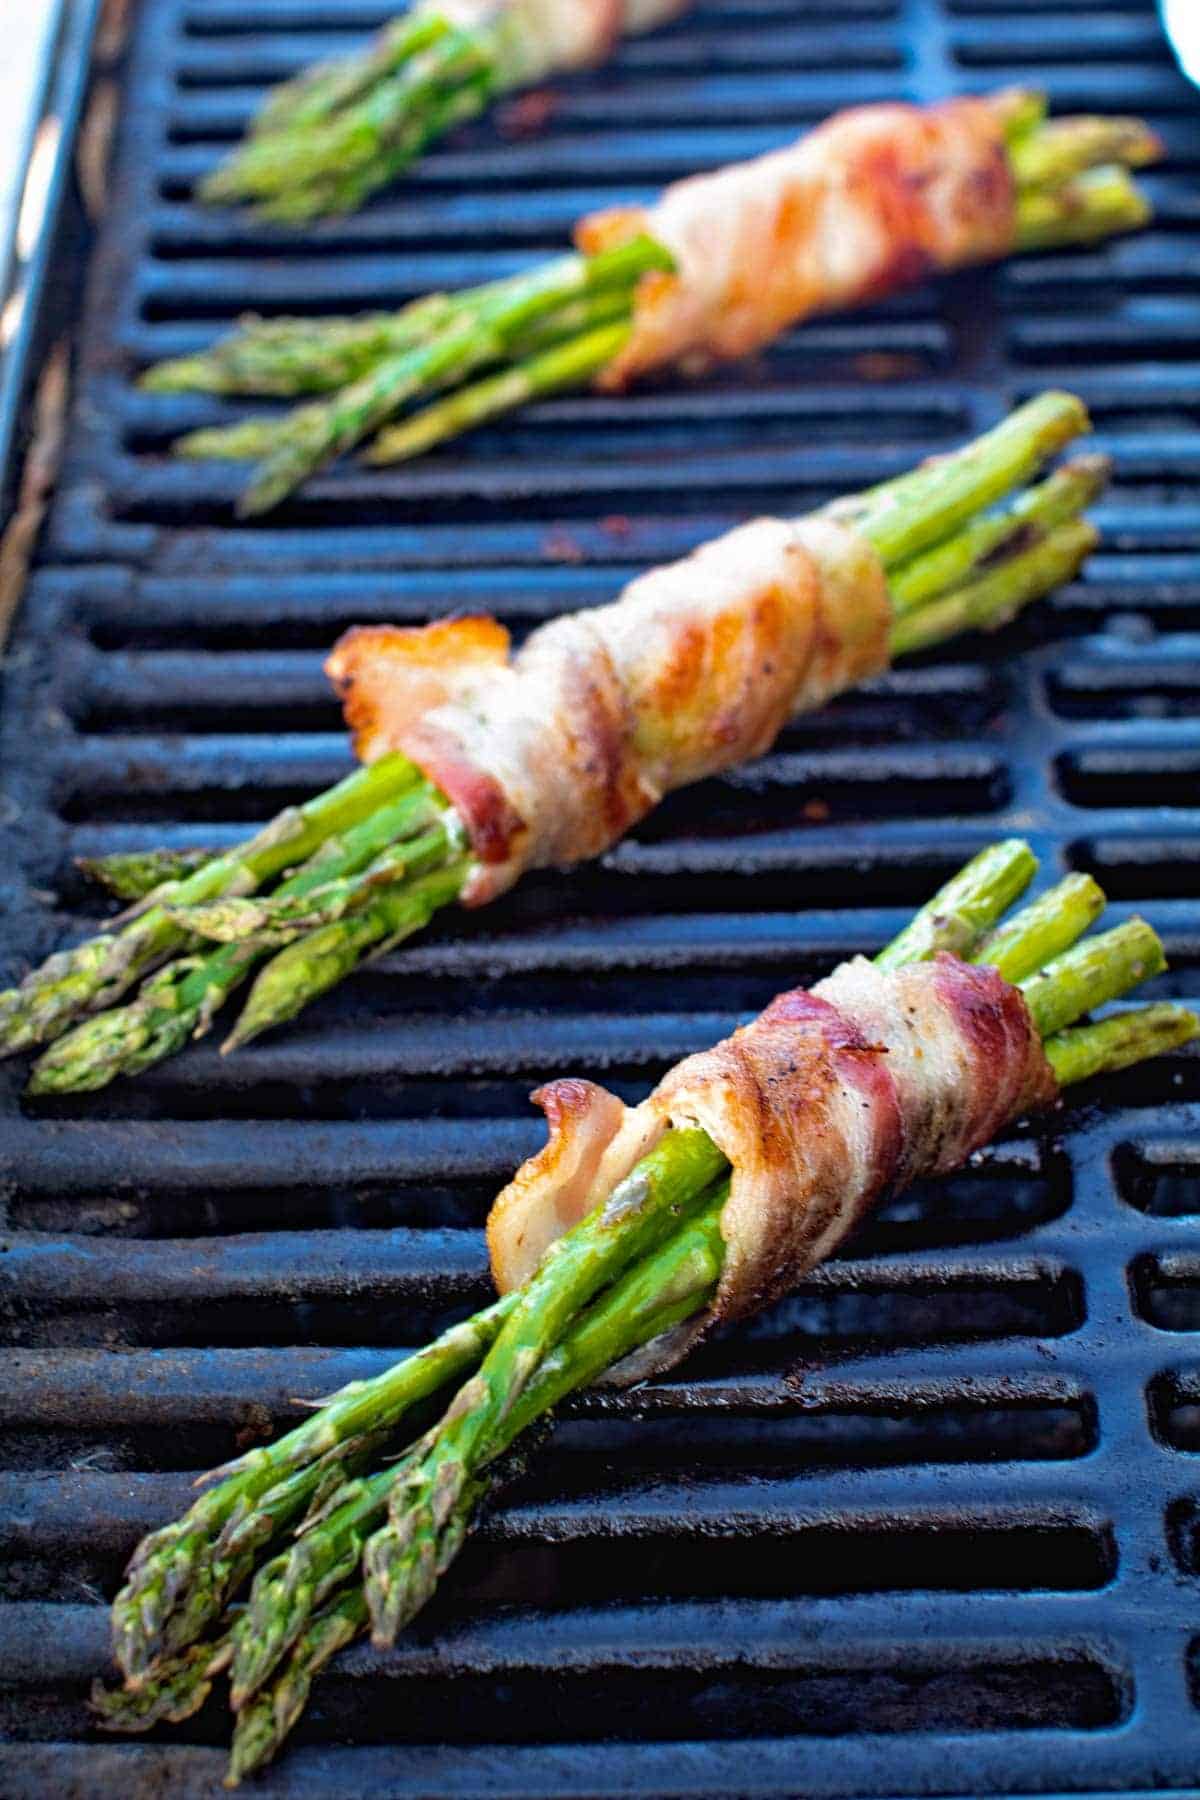 II. Health Benefits of Grilled Asparagus